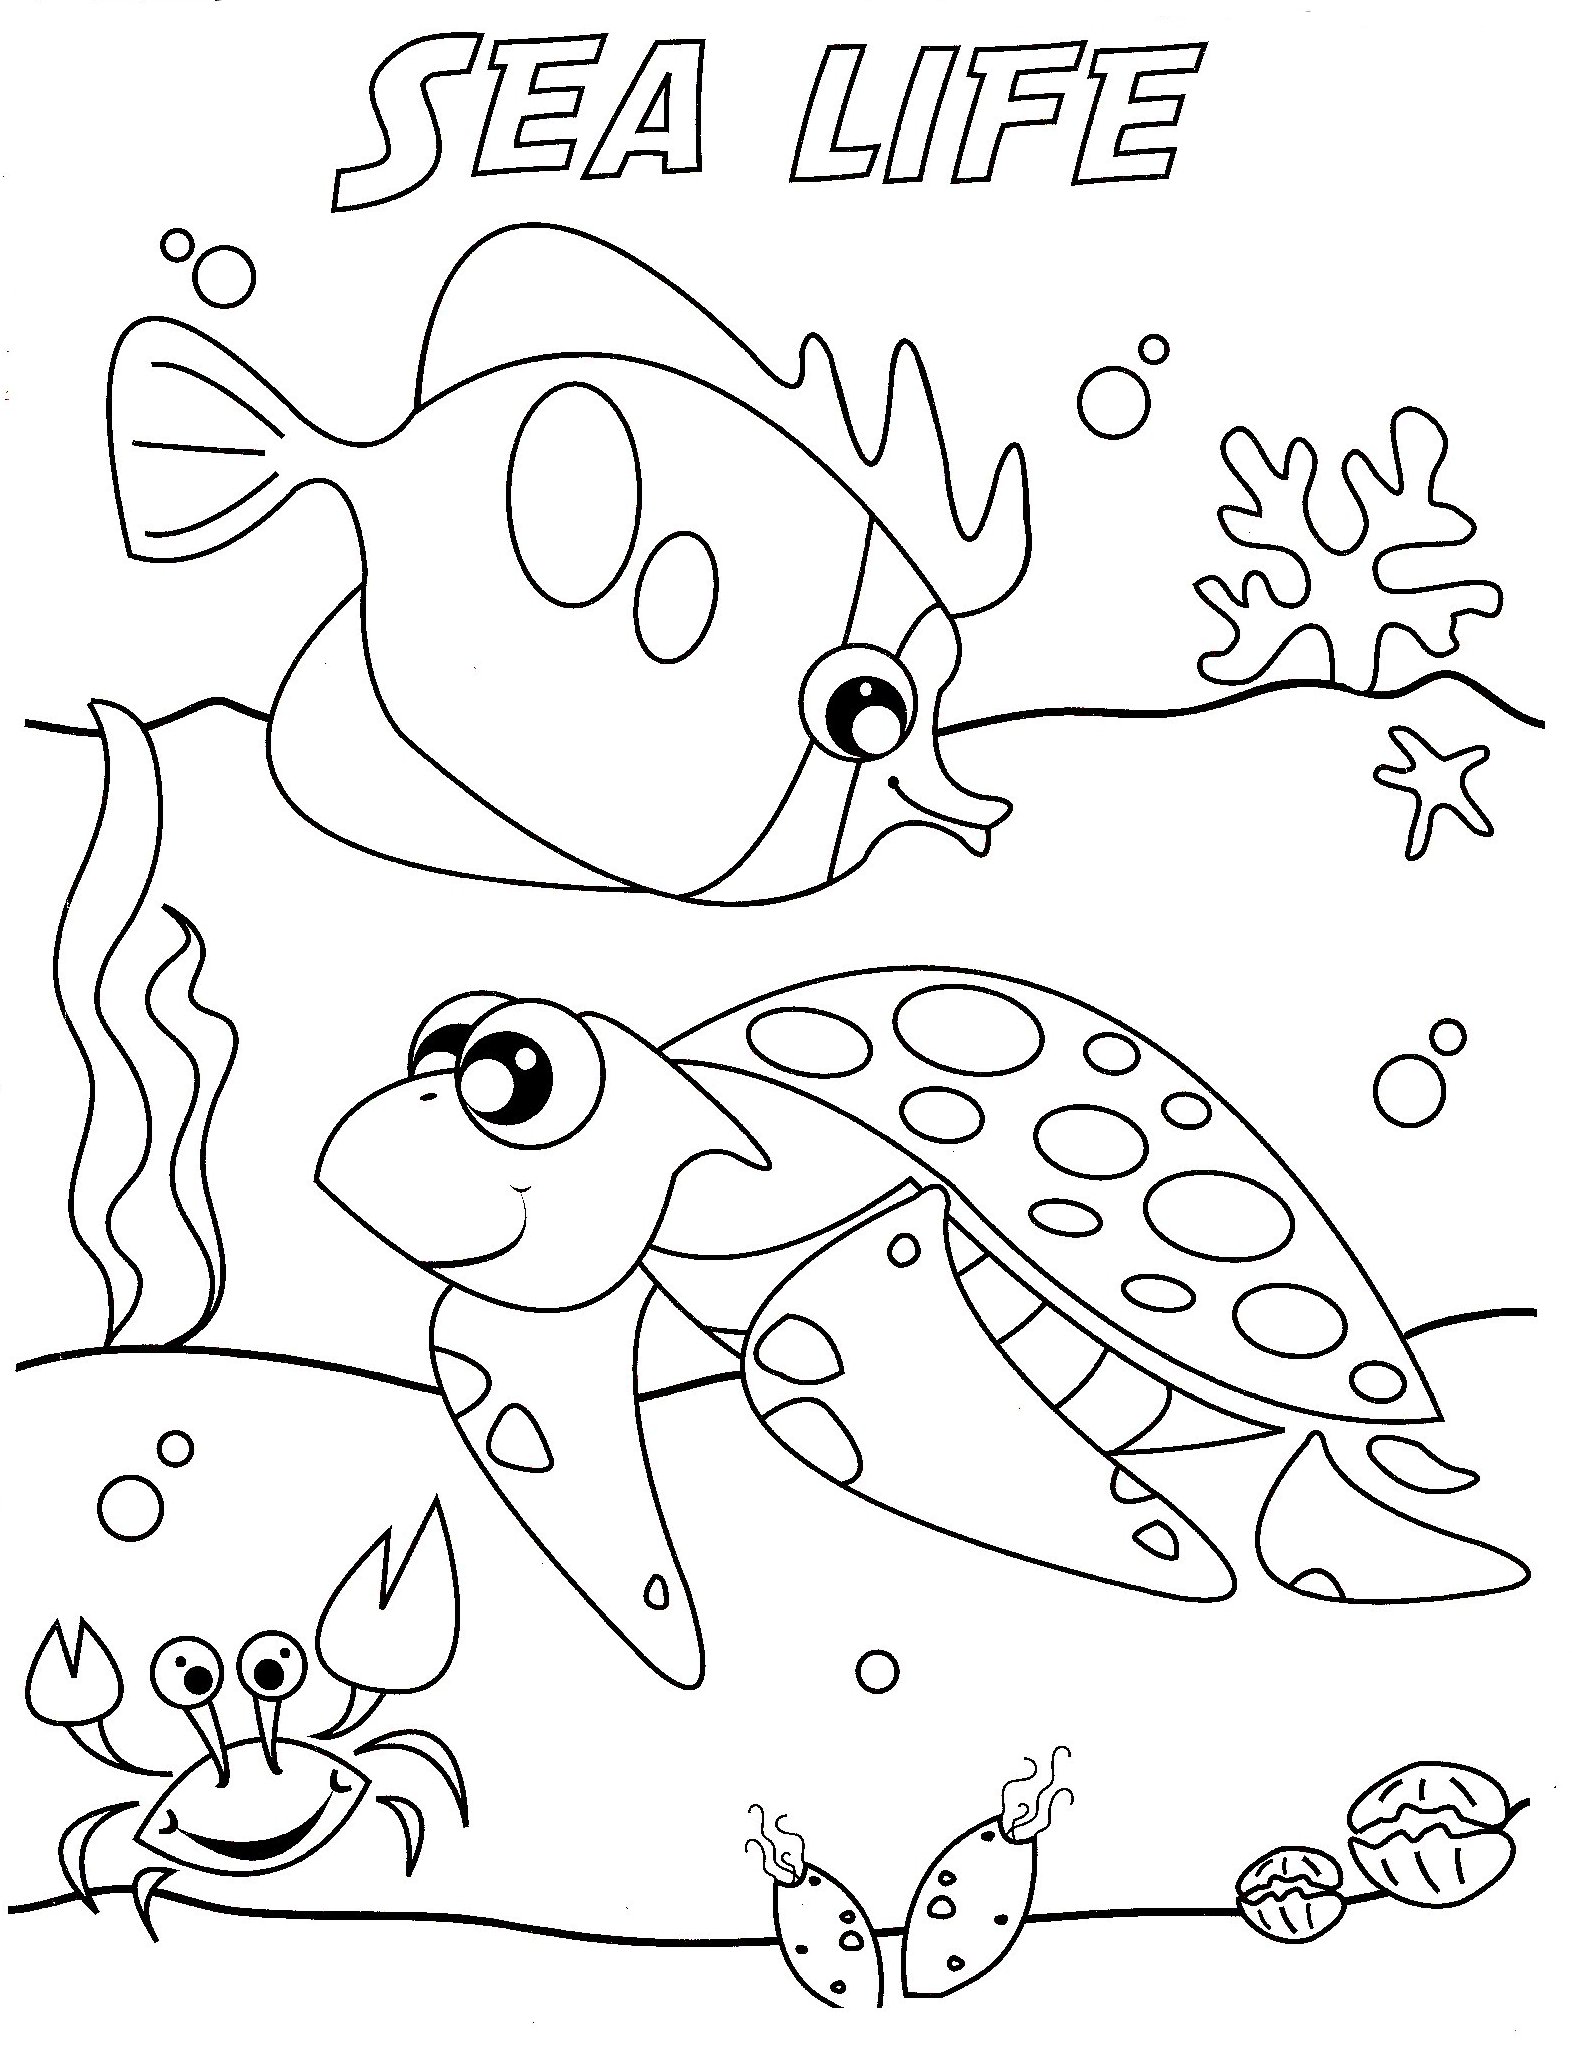 5 Year Old Coloring Pages 5